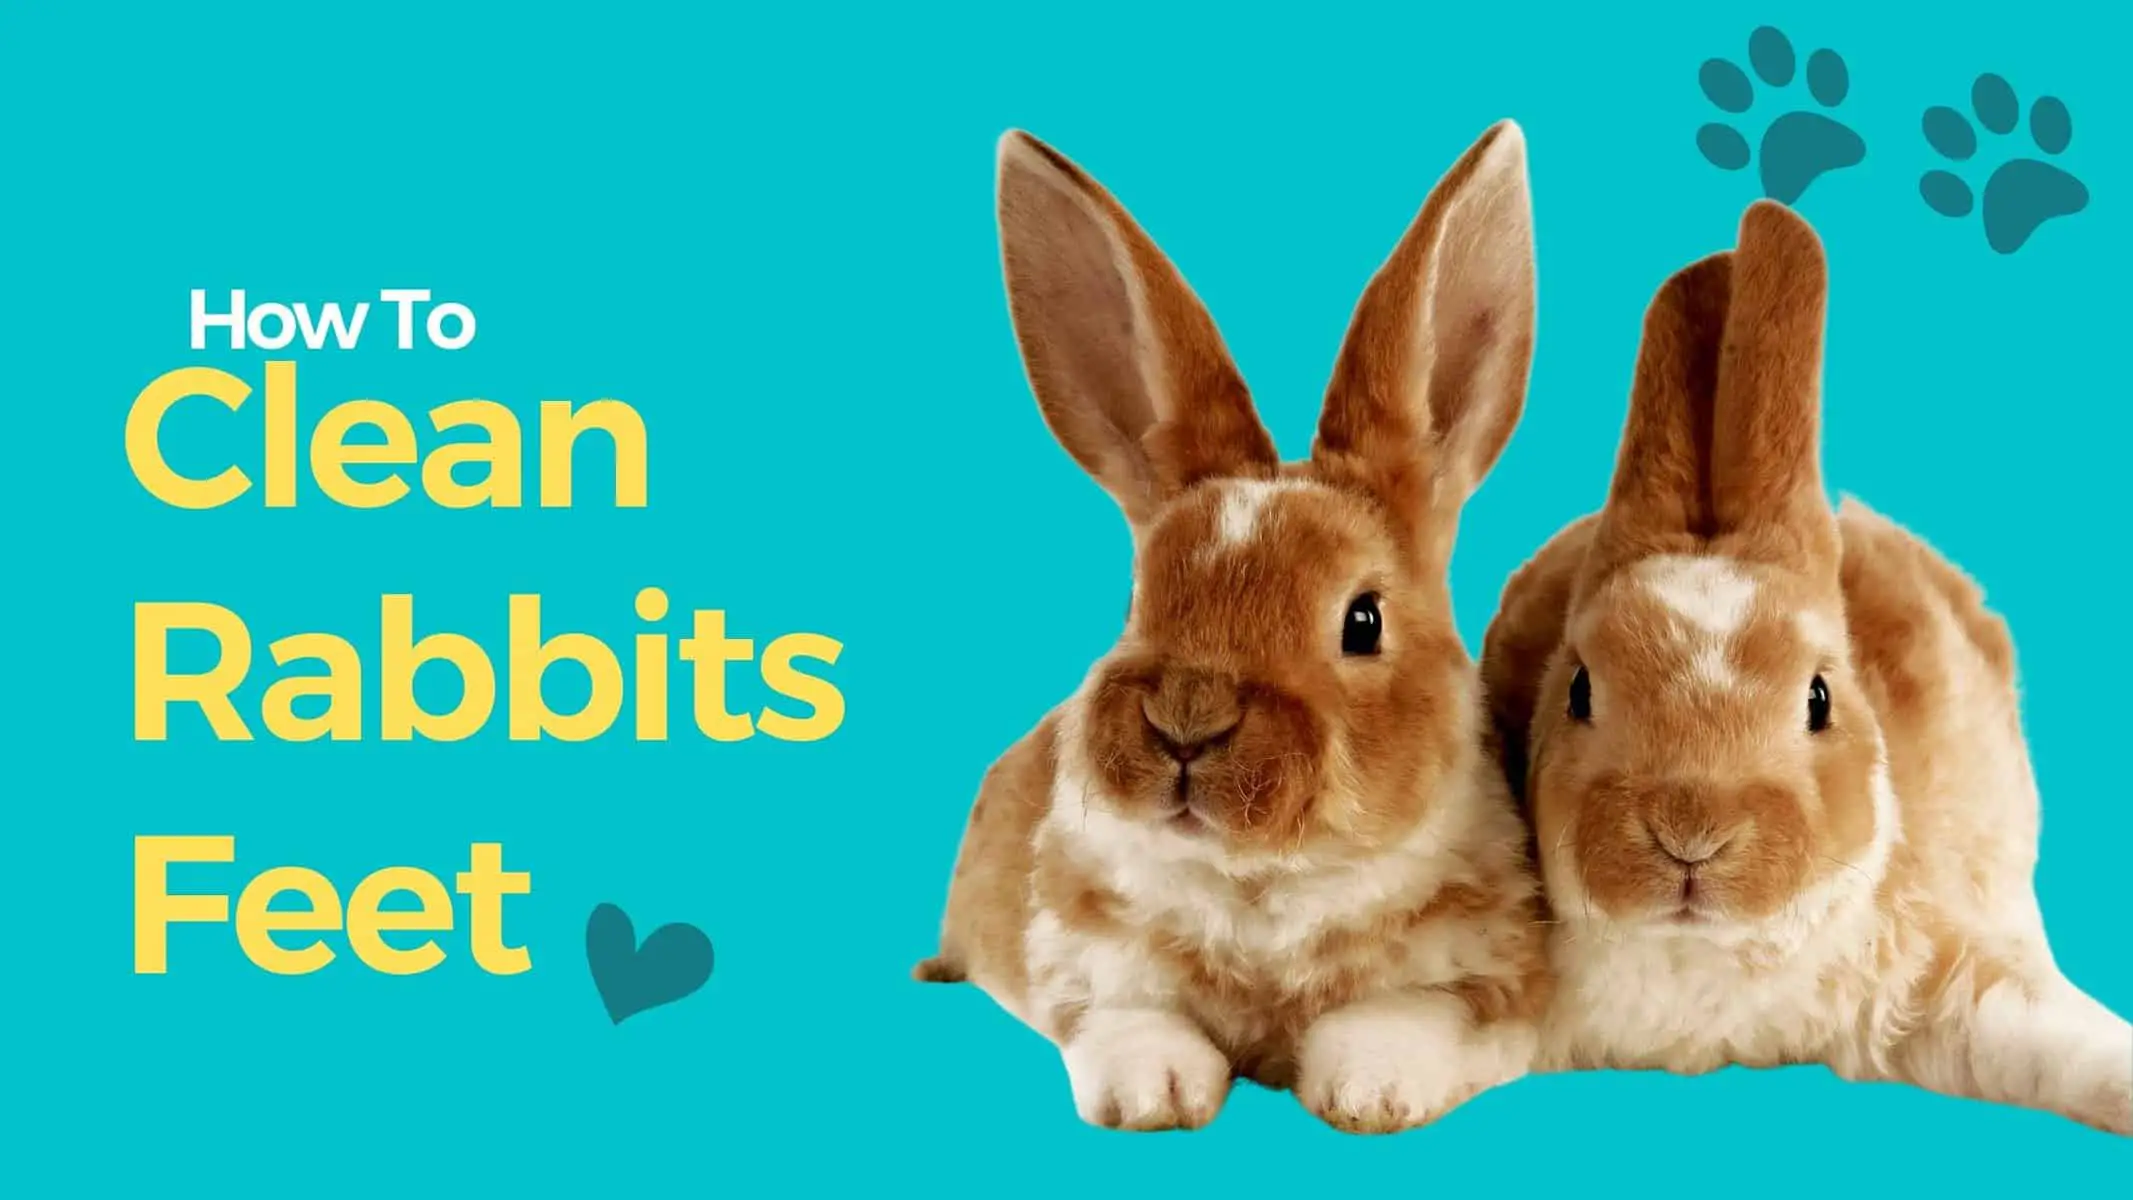 How to clean rabbits feet